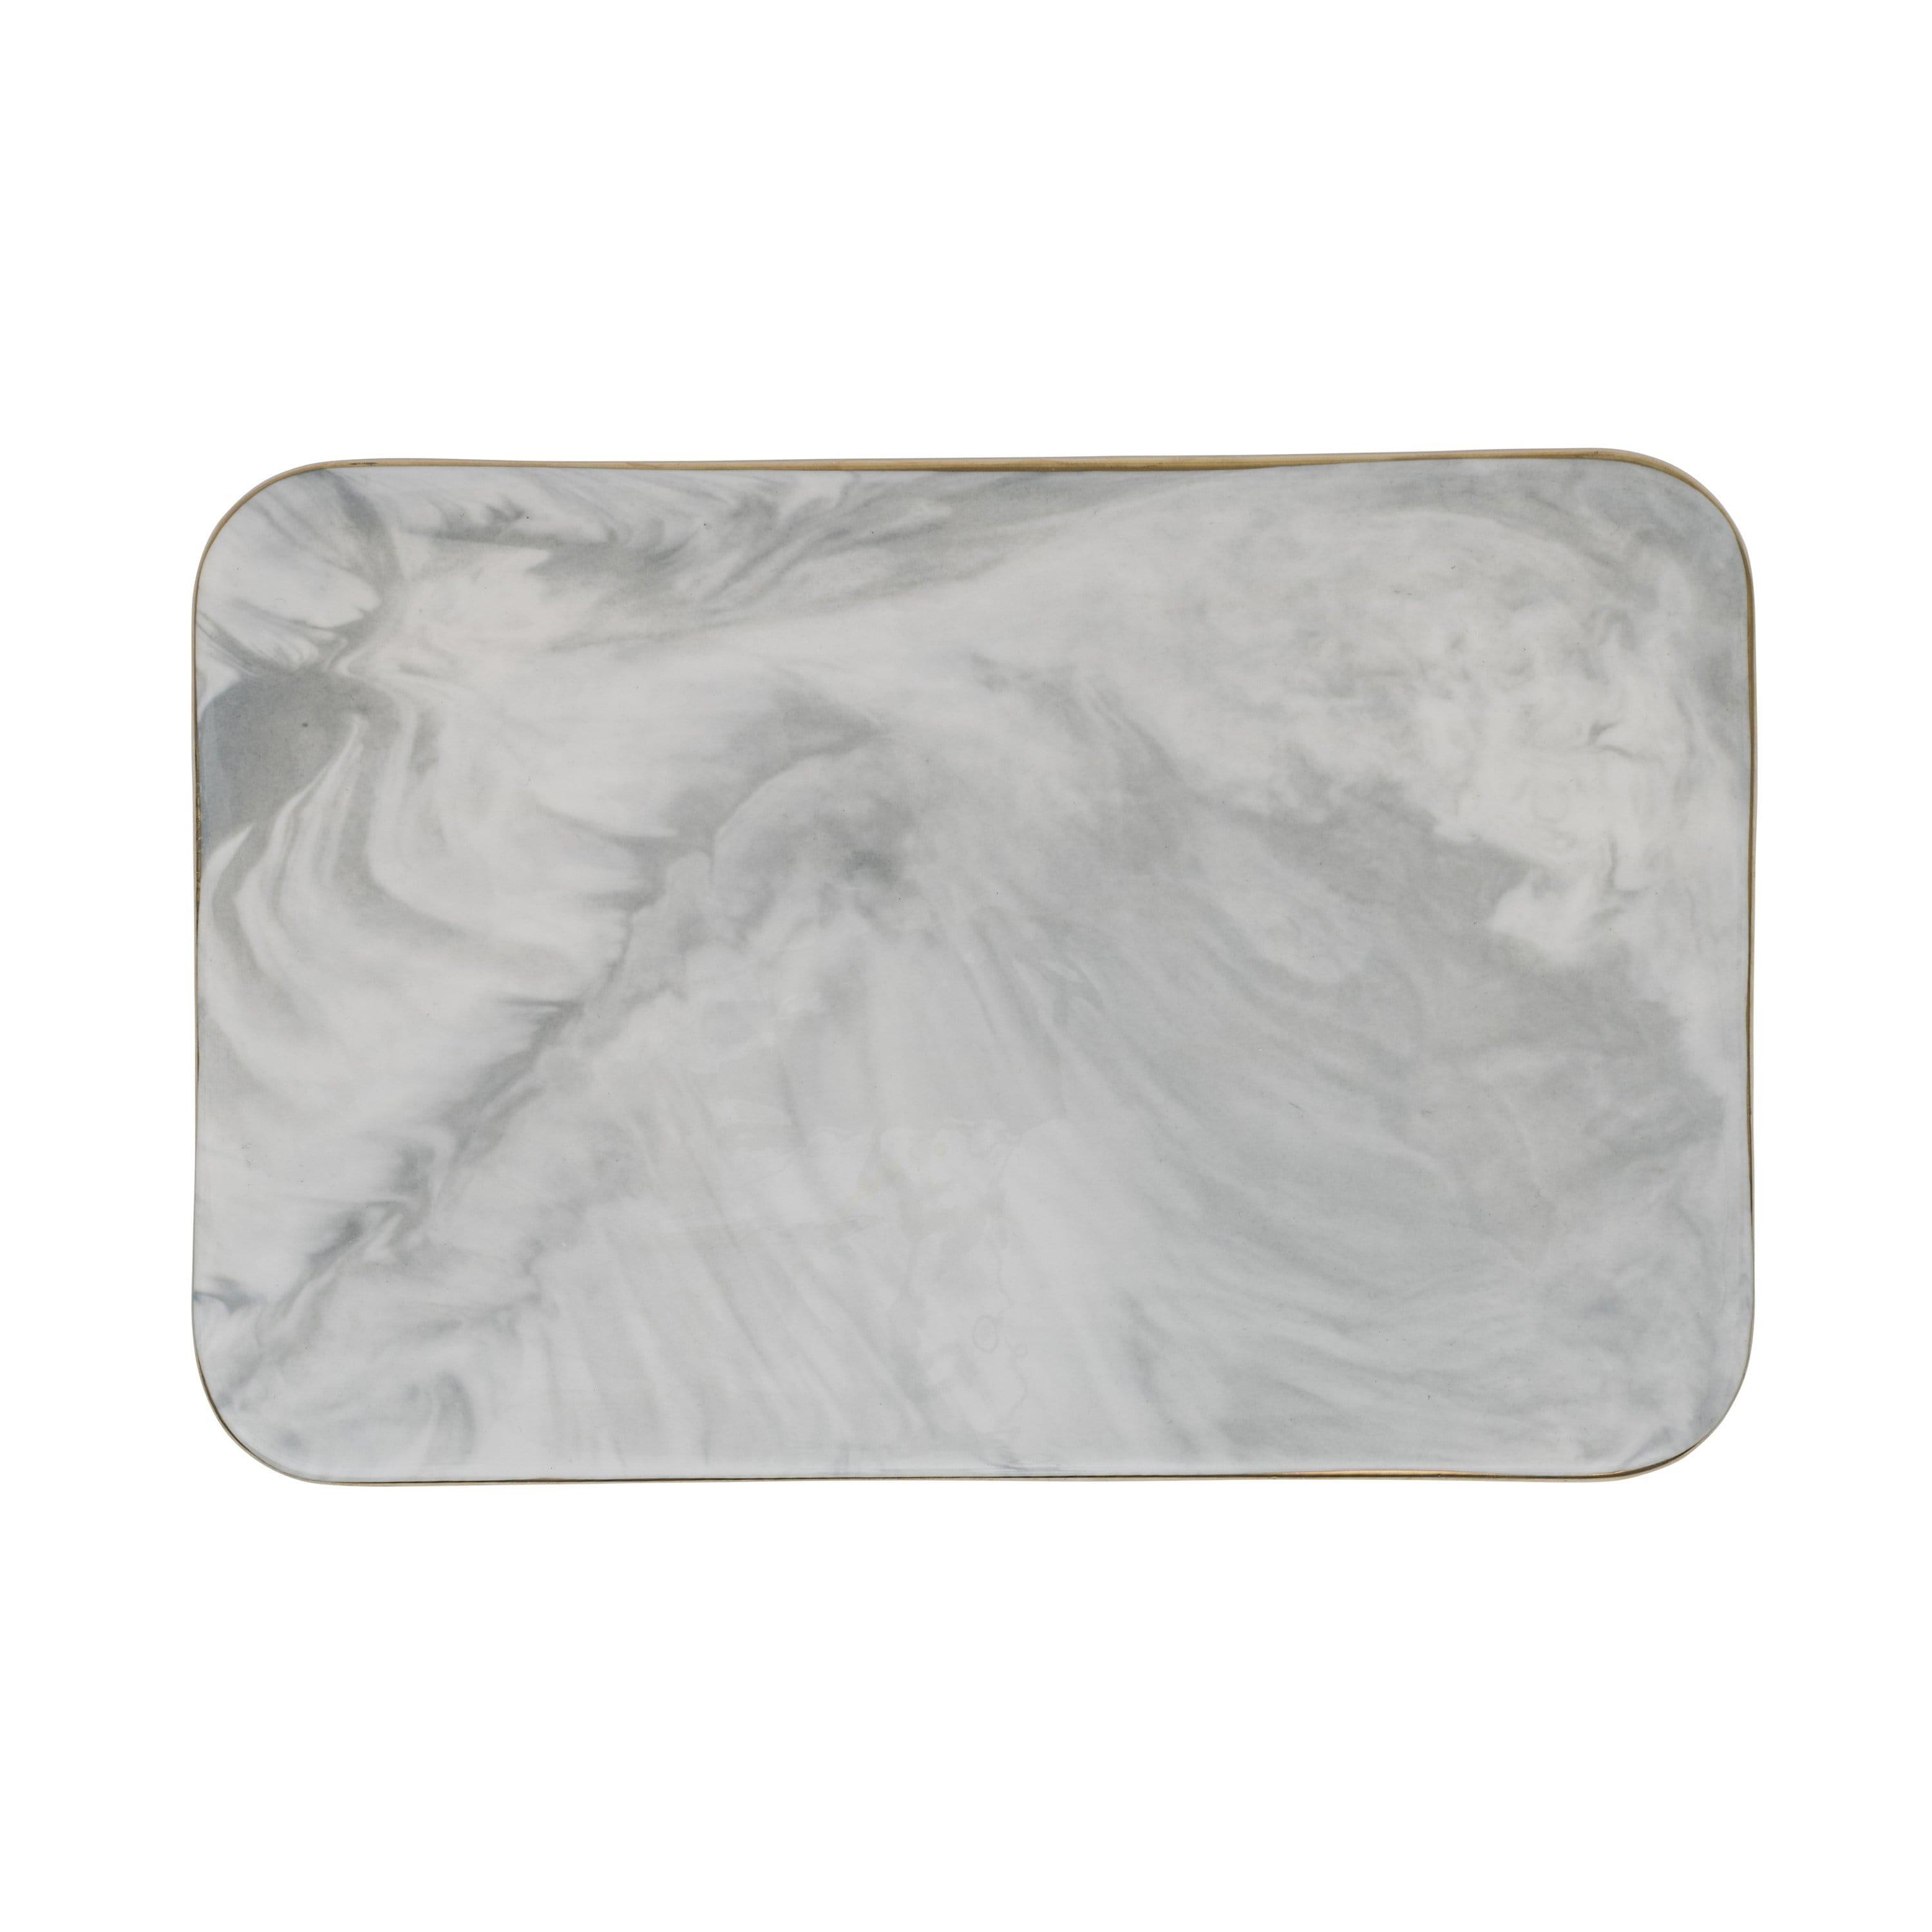 Shop Cutting Board Rounded Rim / Large Marble Board Mademoiselle Home Decor